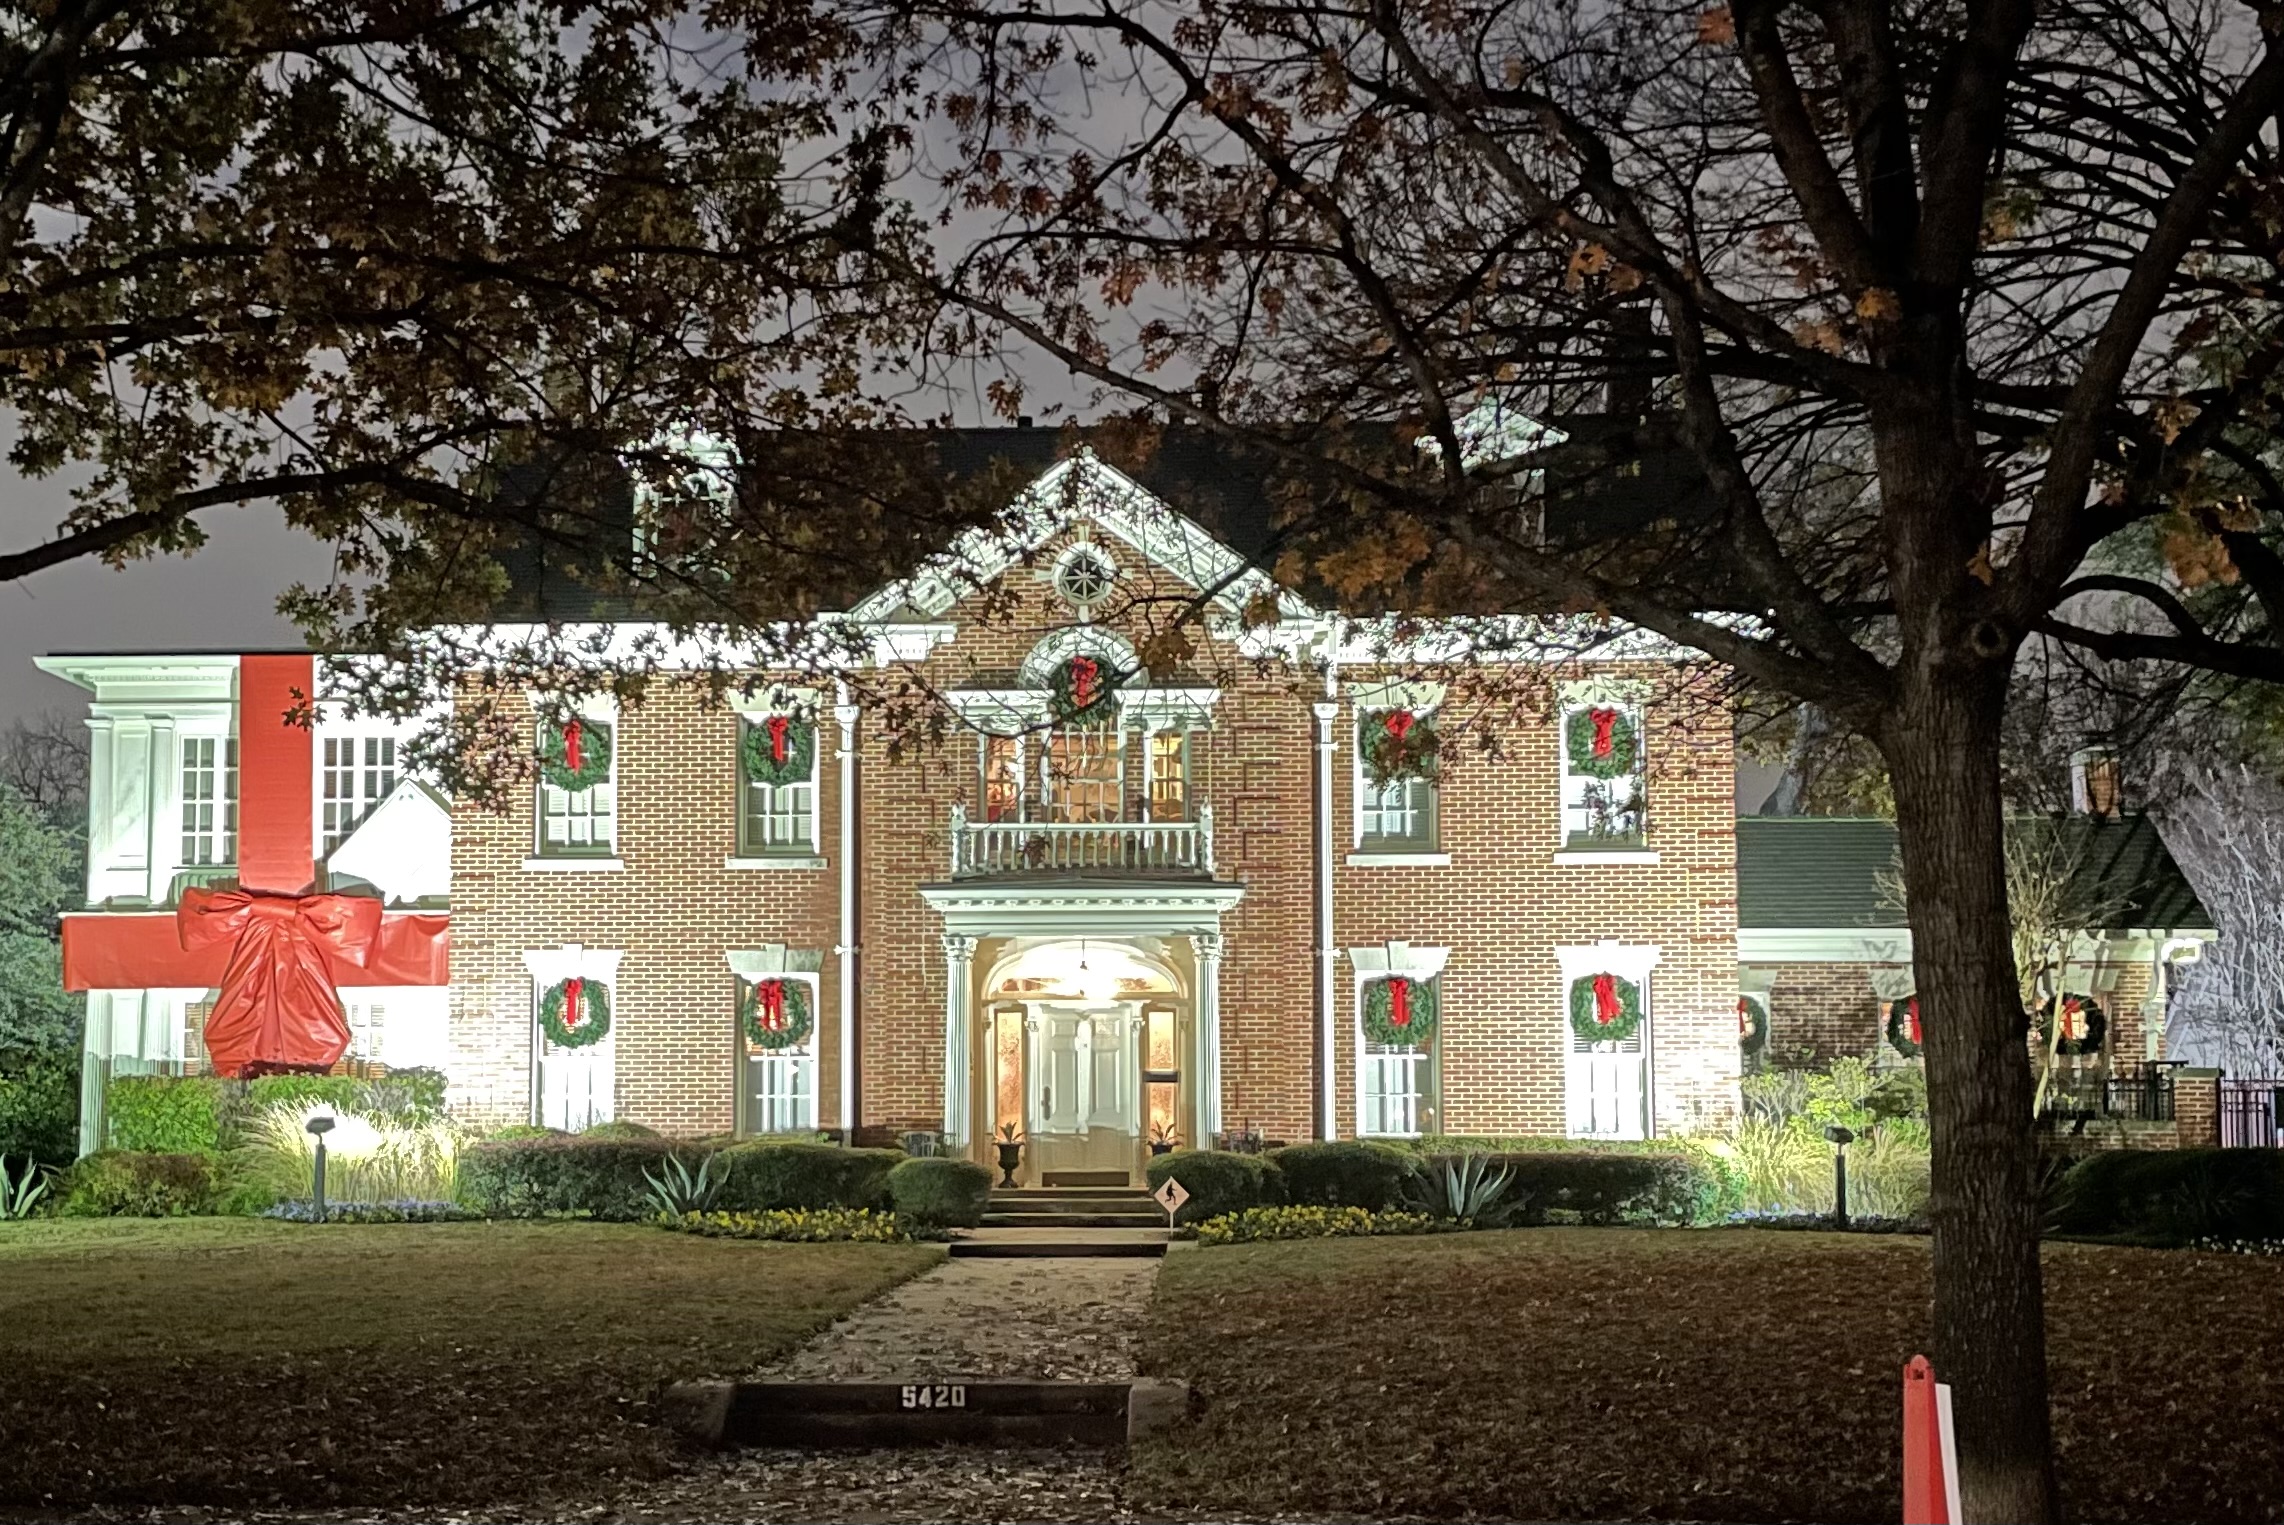 Swiss Avenue home decorated with wreaths and bow